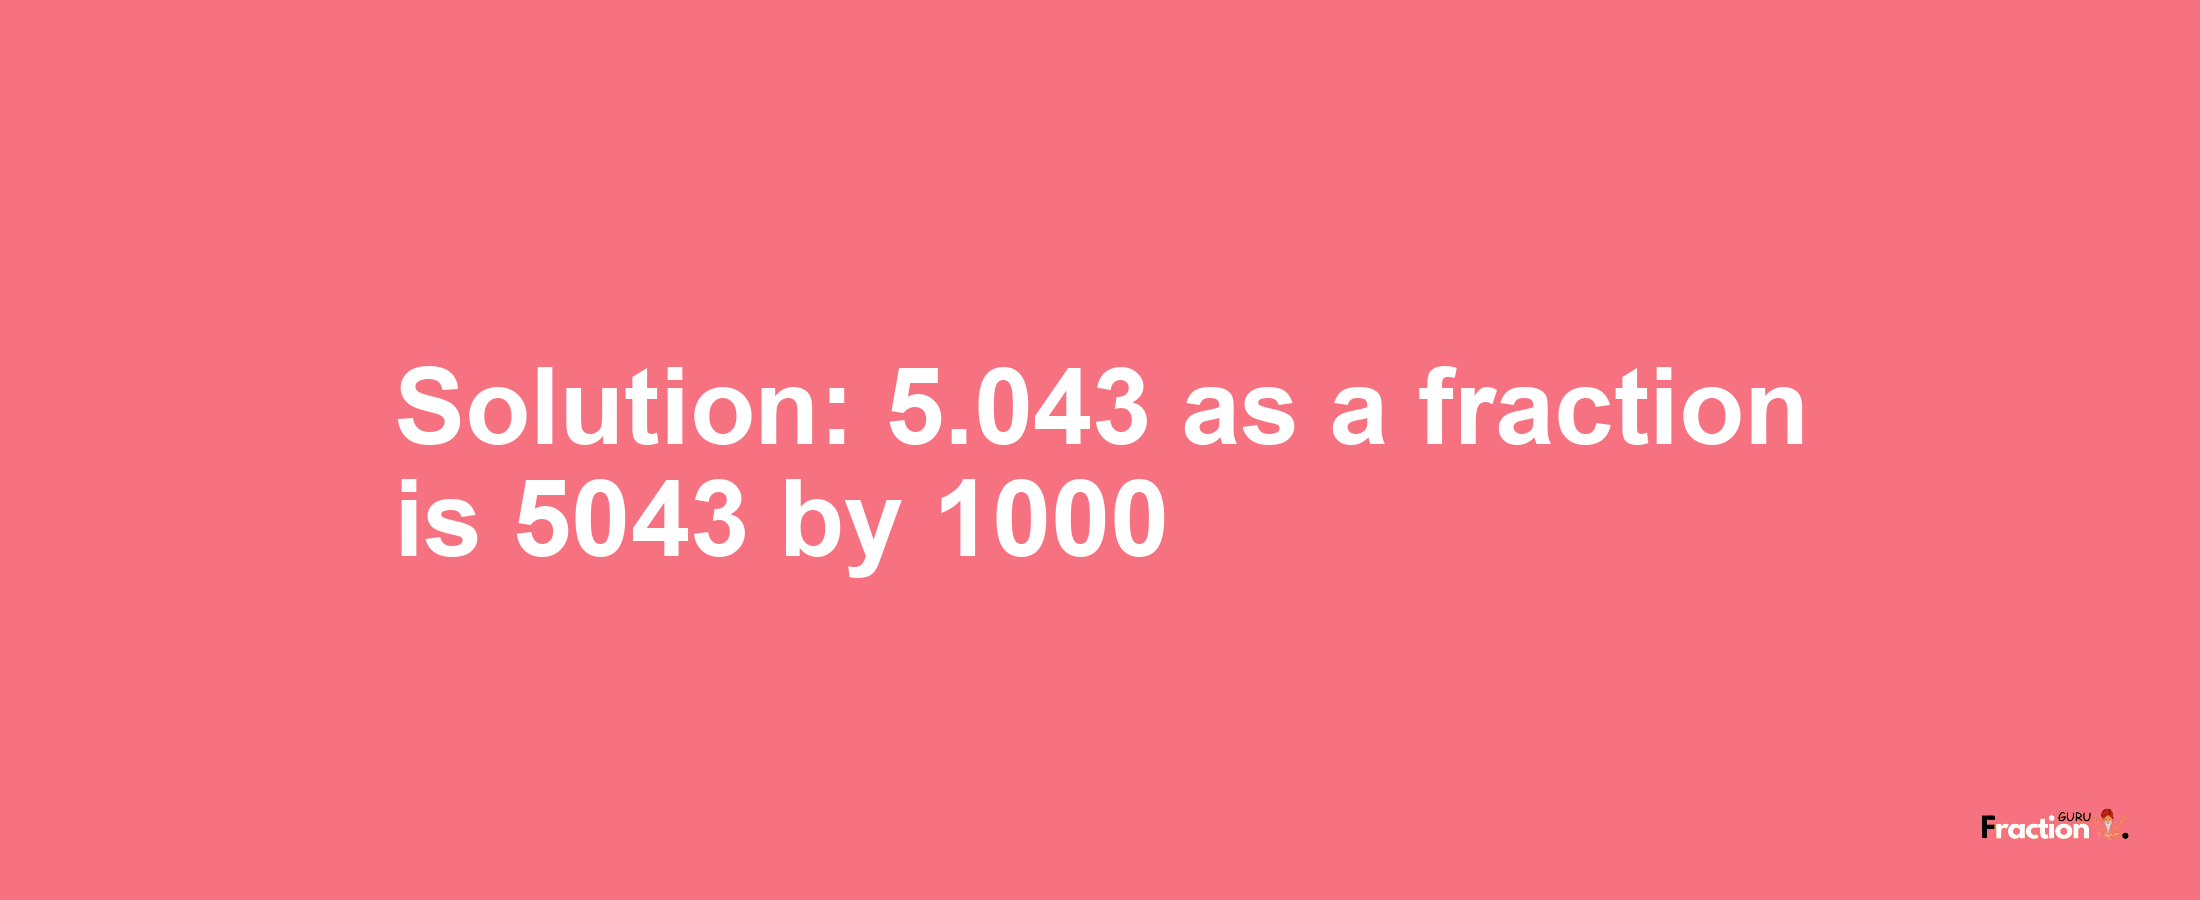 Solution:5.043 as a fraction is 5043/1000